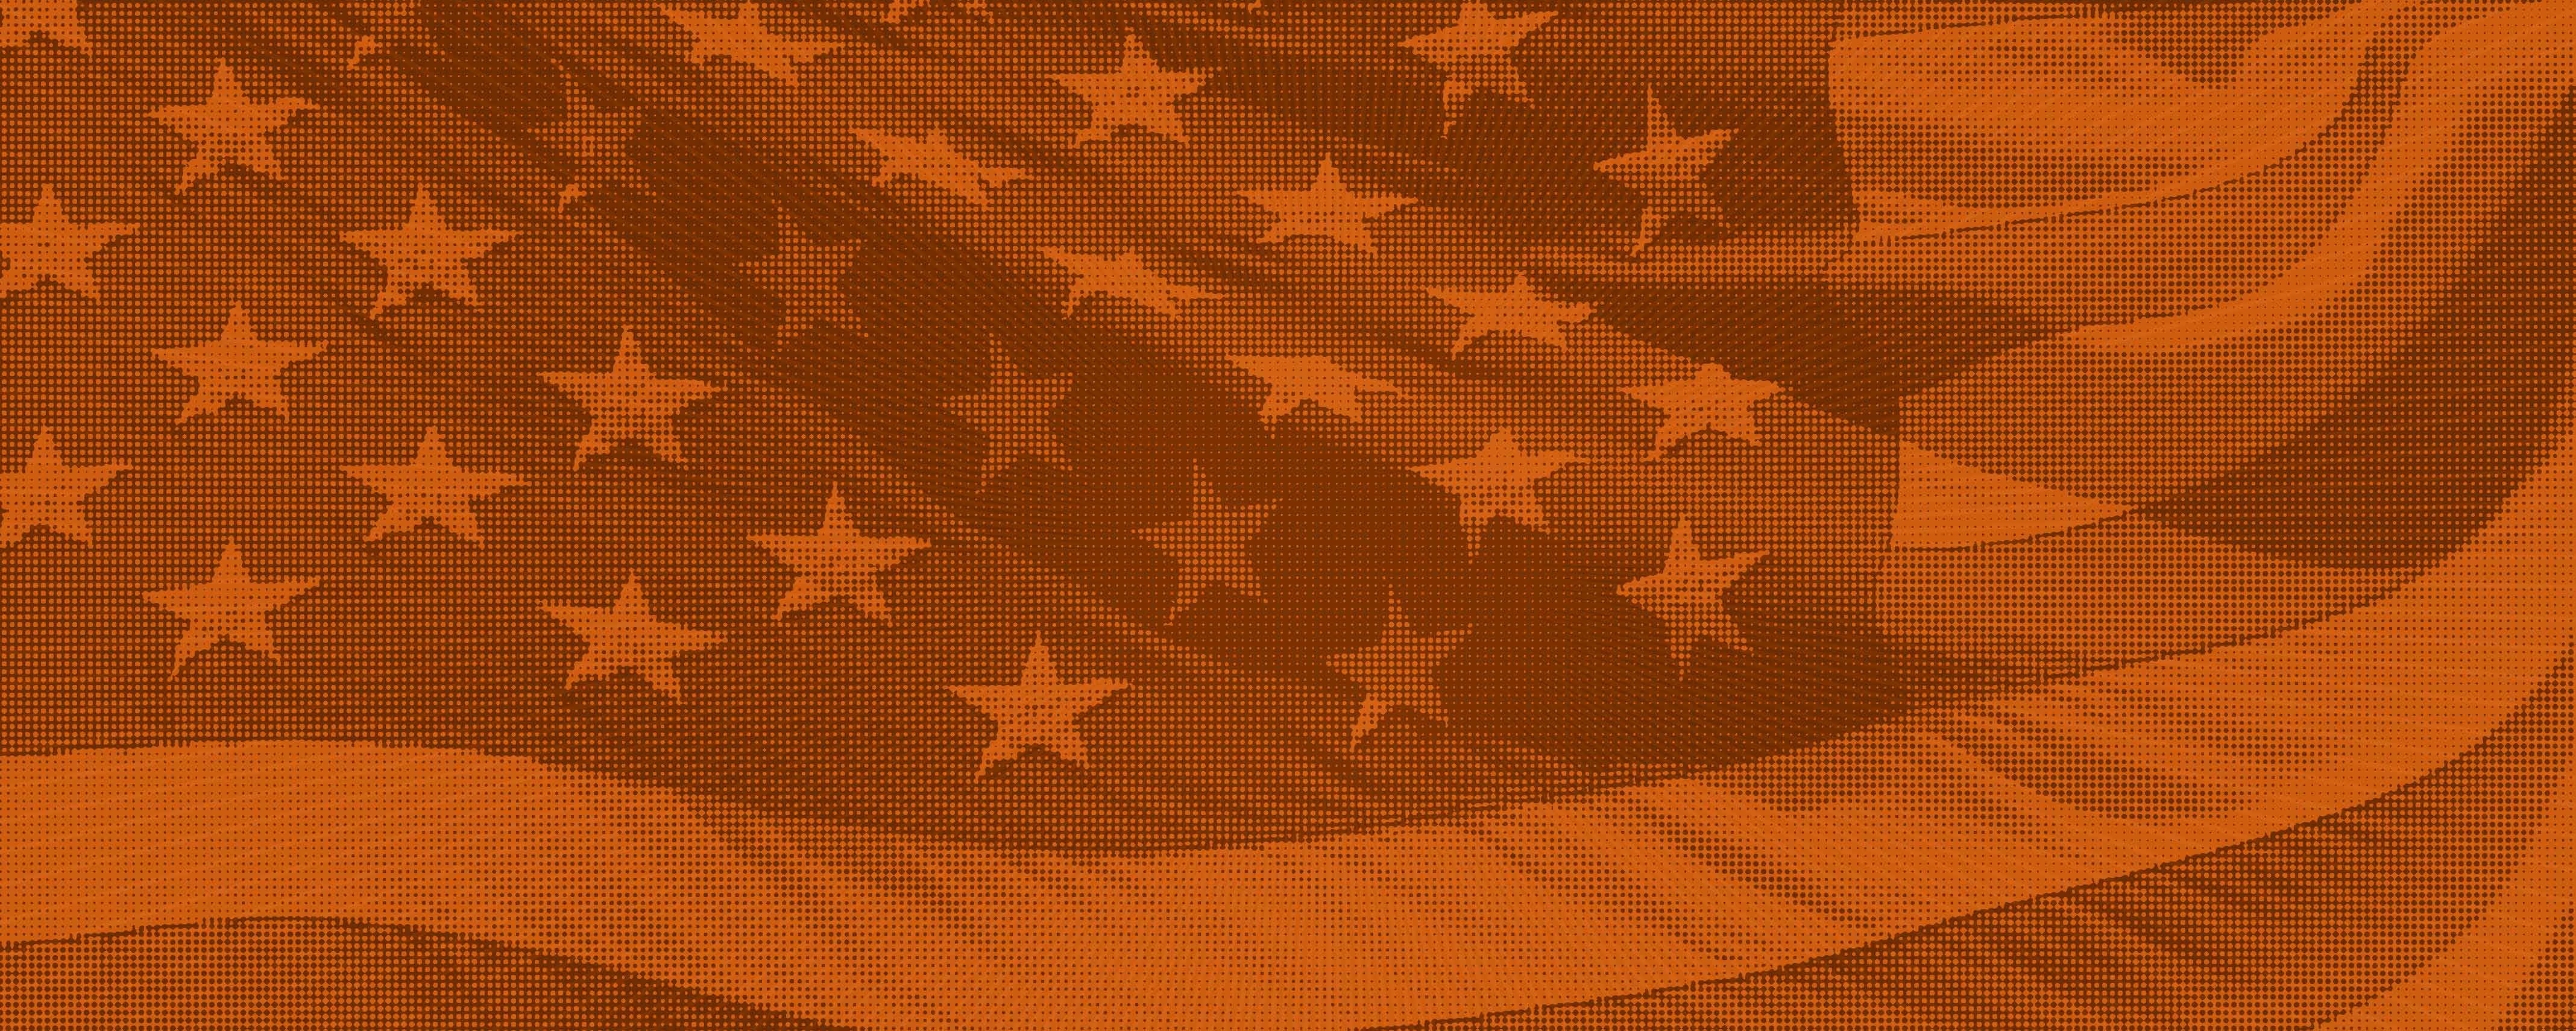 United States of America flag with a rust orange overlay on top